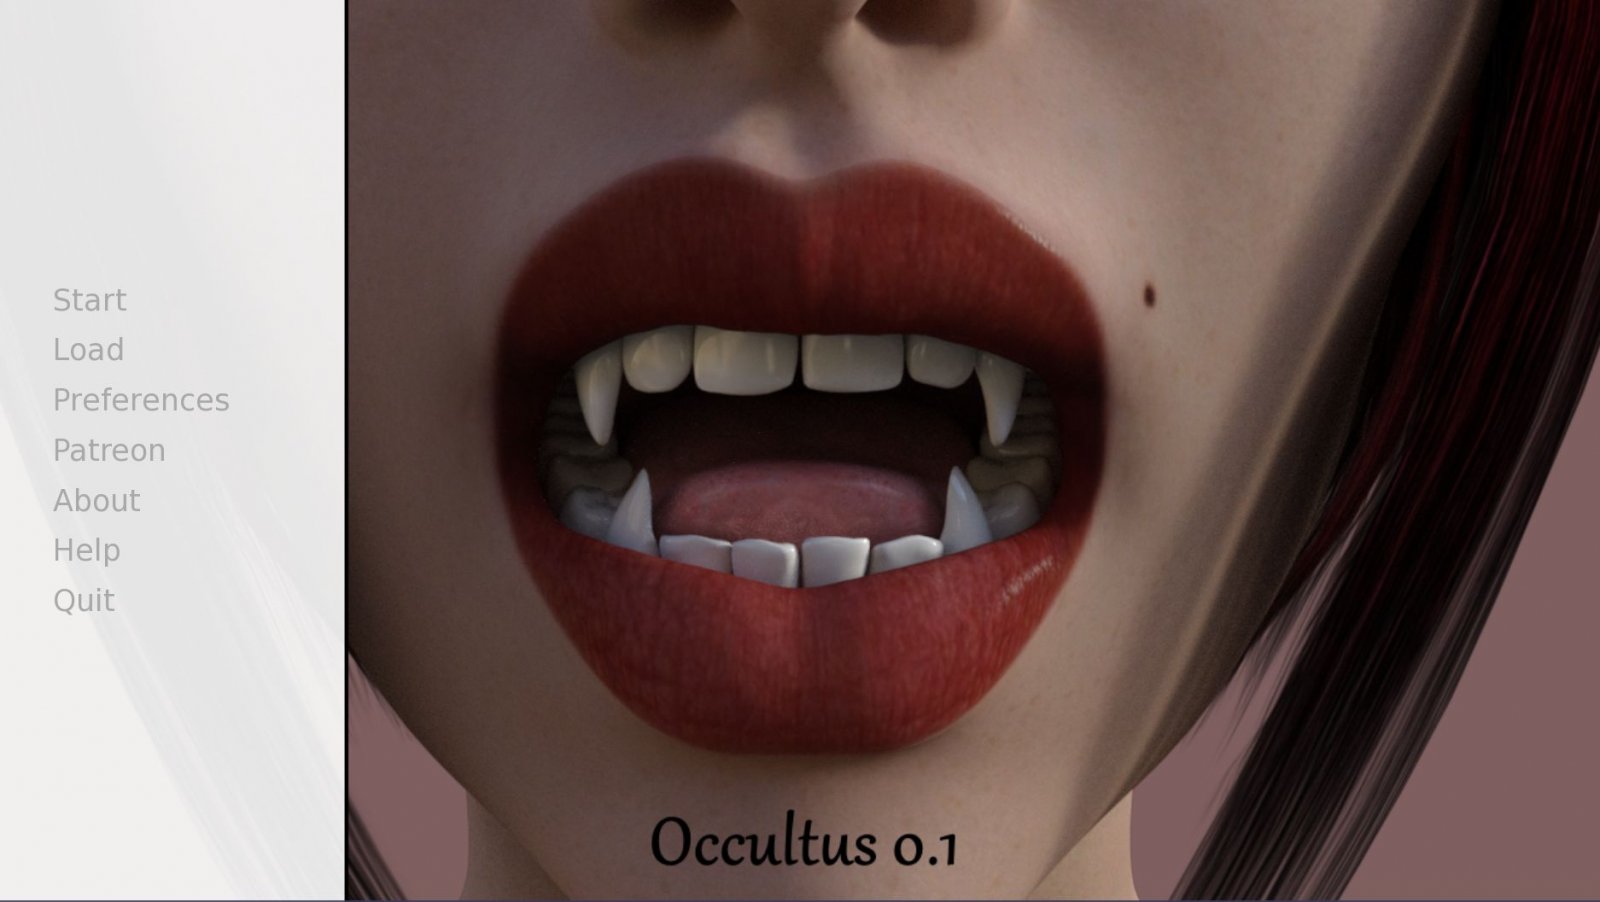 OCCULTUS VERSION 0.30 BY BC